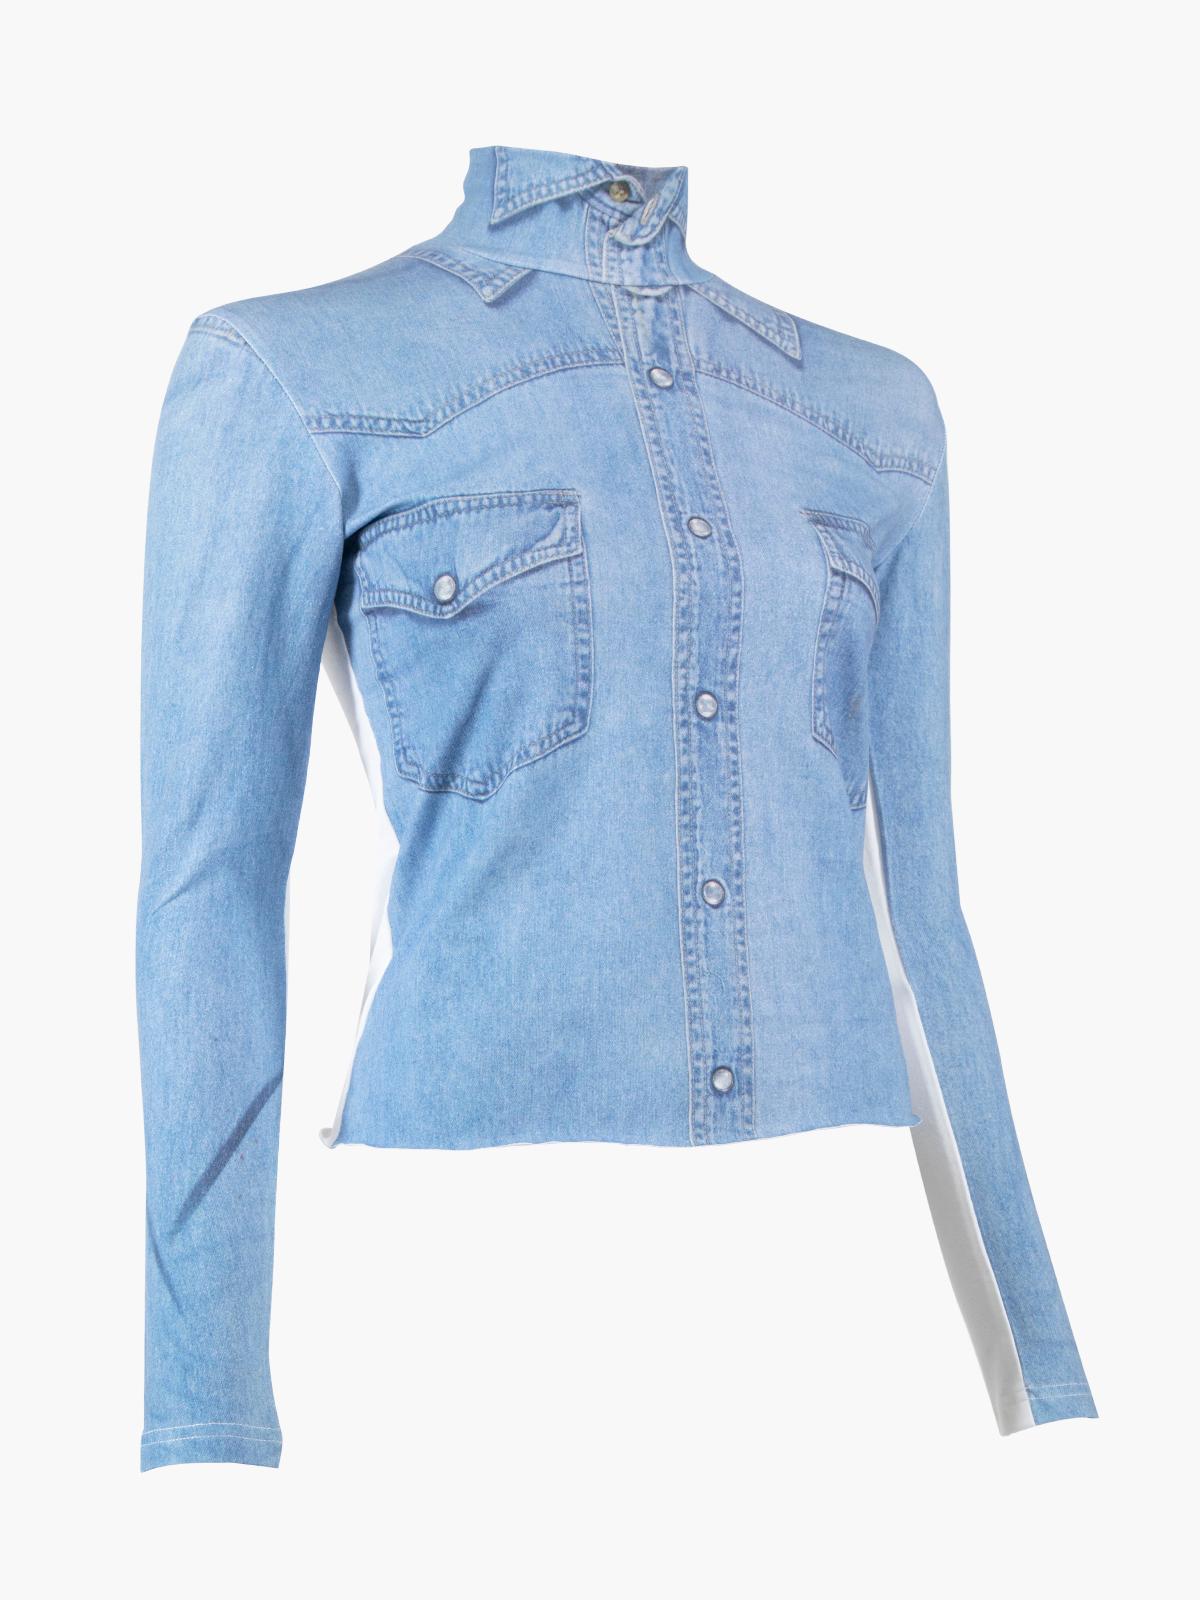 CONDITION is Never worn, with tags. No visible wear to top is evident on this new Vetements designer resale item. Details Blue Cotton Fitted Long sleeves High Neckline Made in PORTUGAL Composition 94% COTTON, 6% ELASTHANE Care instructions: